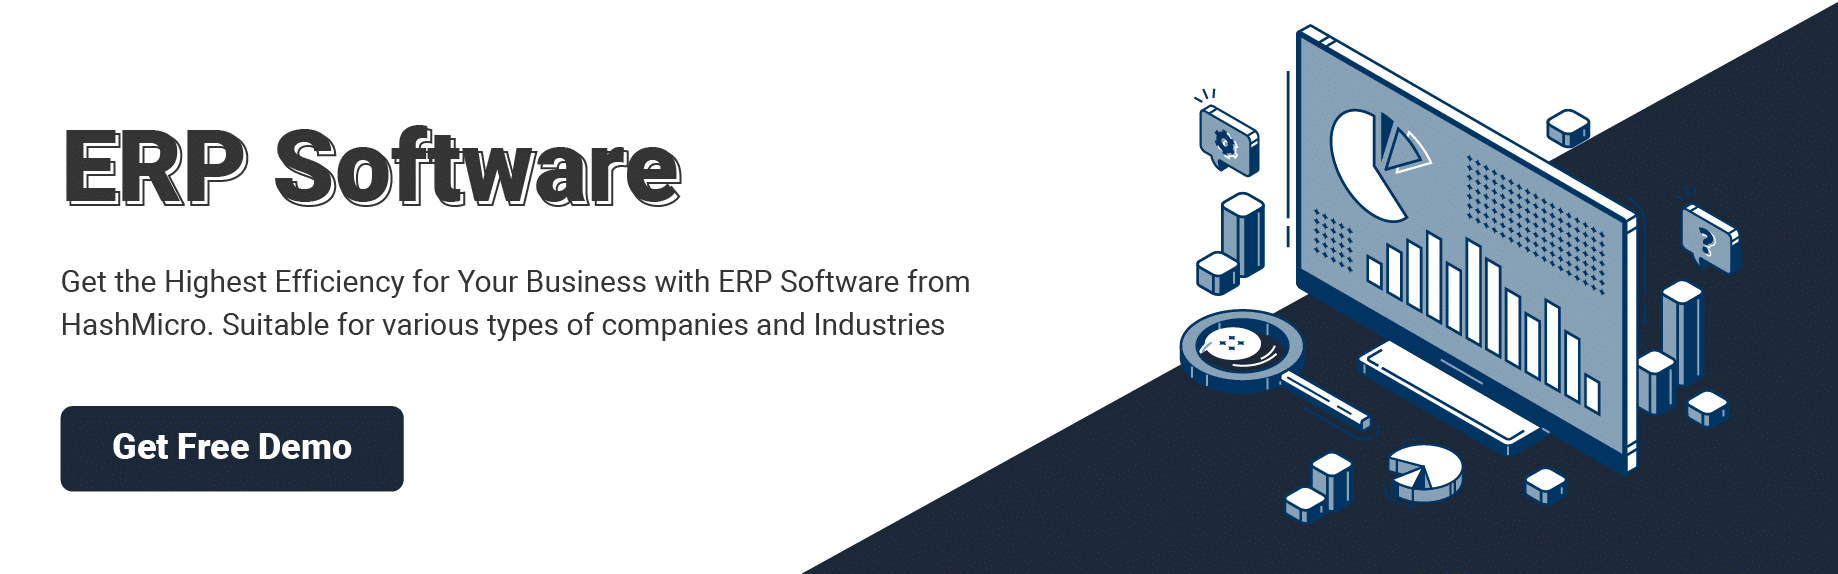 erp for smes